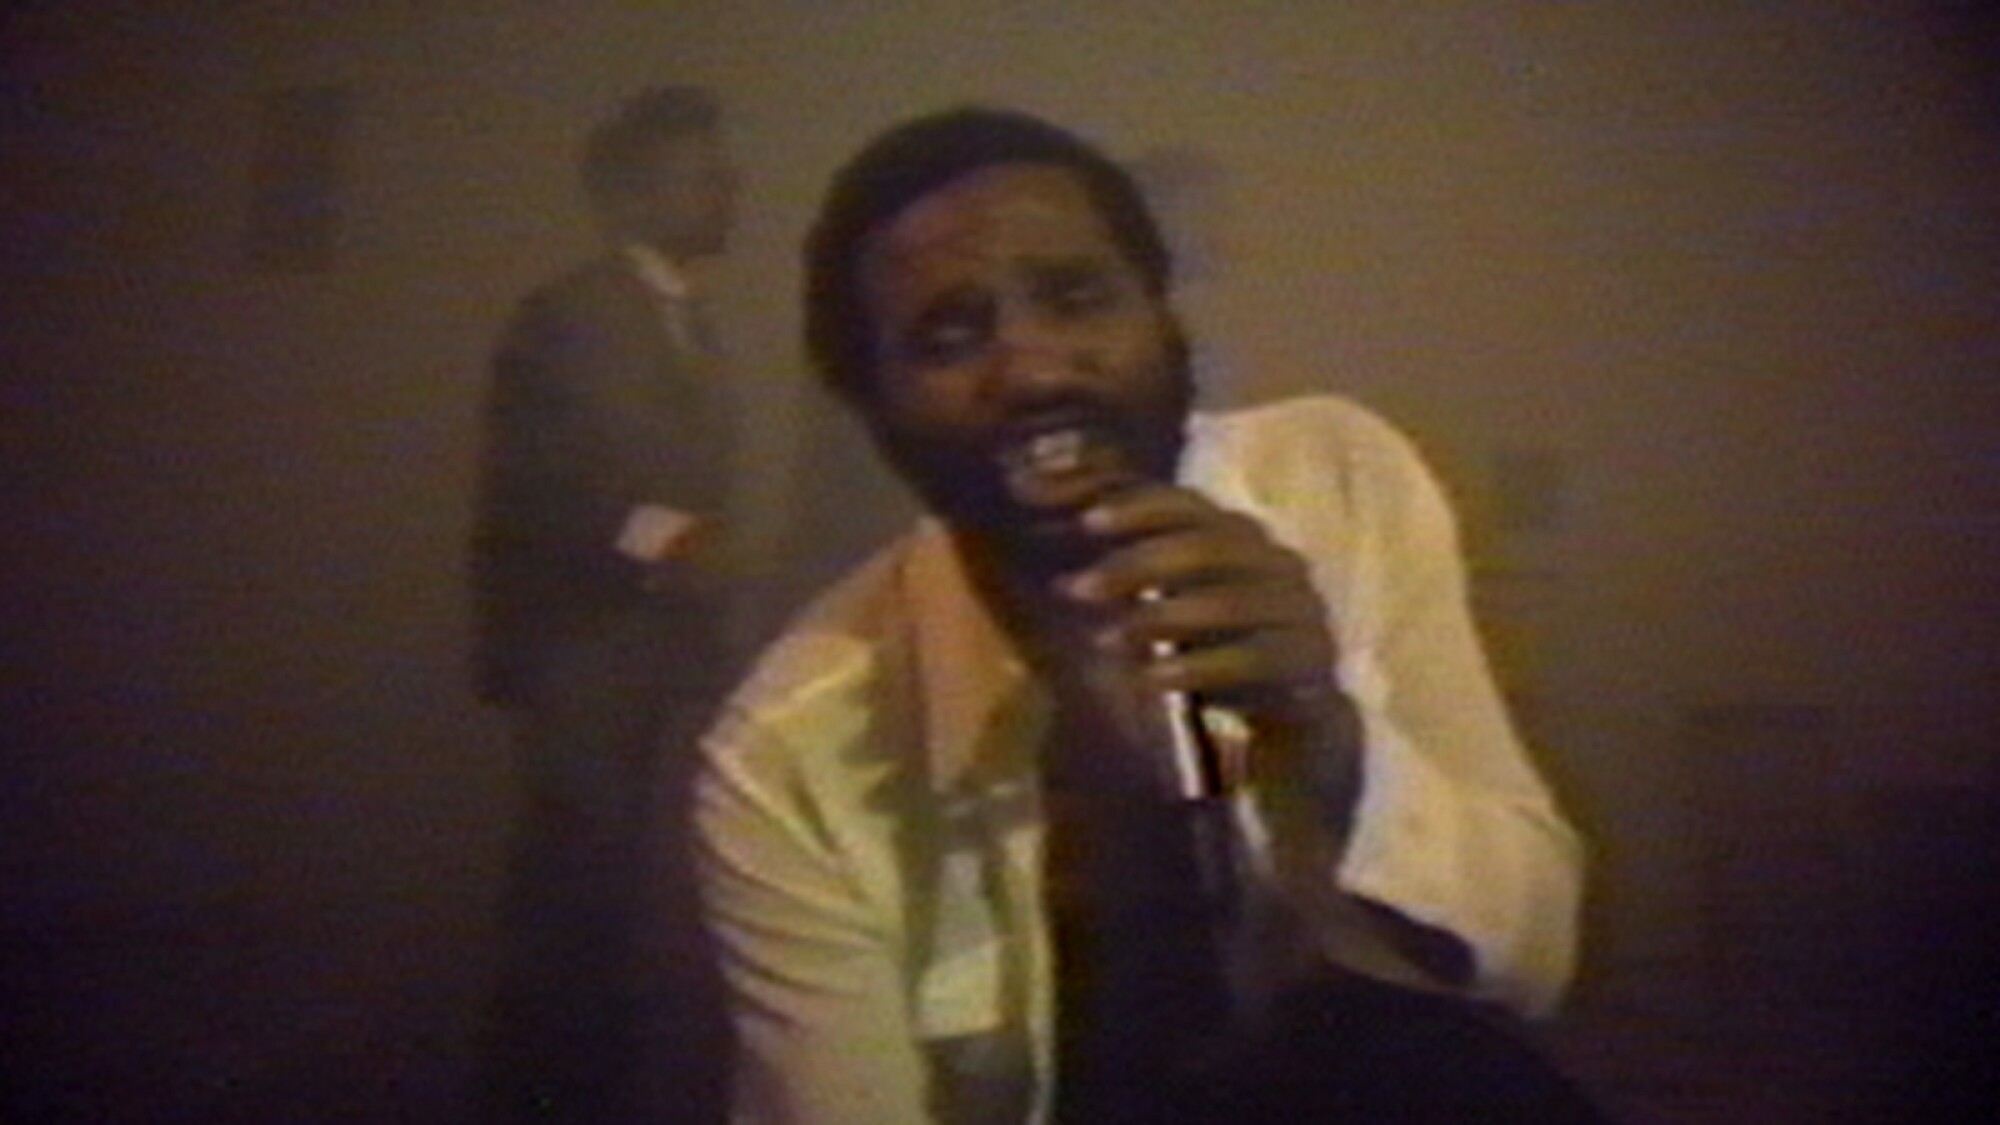 A video still shows Ulysses Jenkins singing dramatically into a microphone as a trio performs behind him